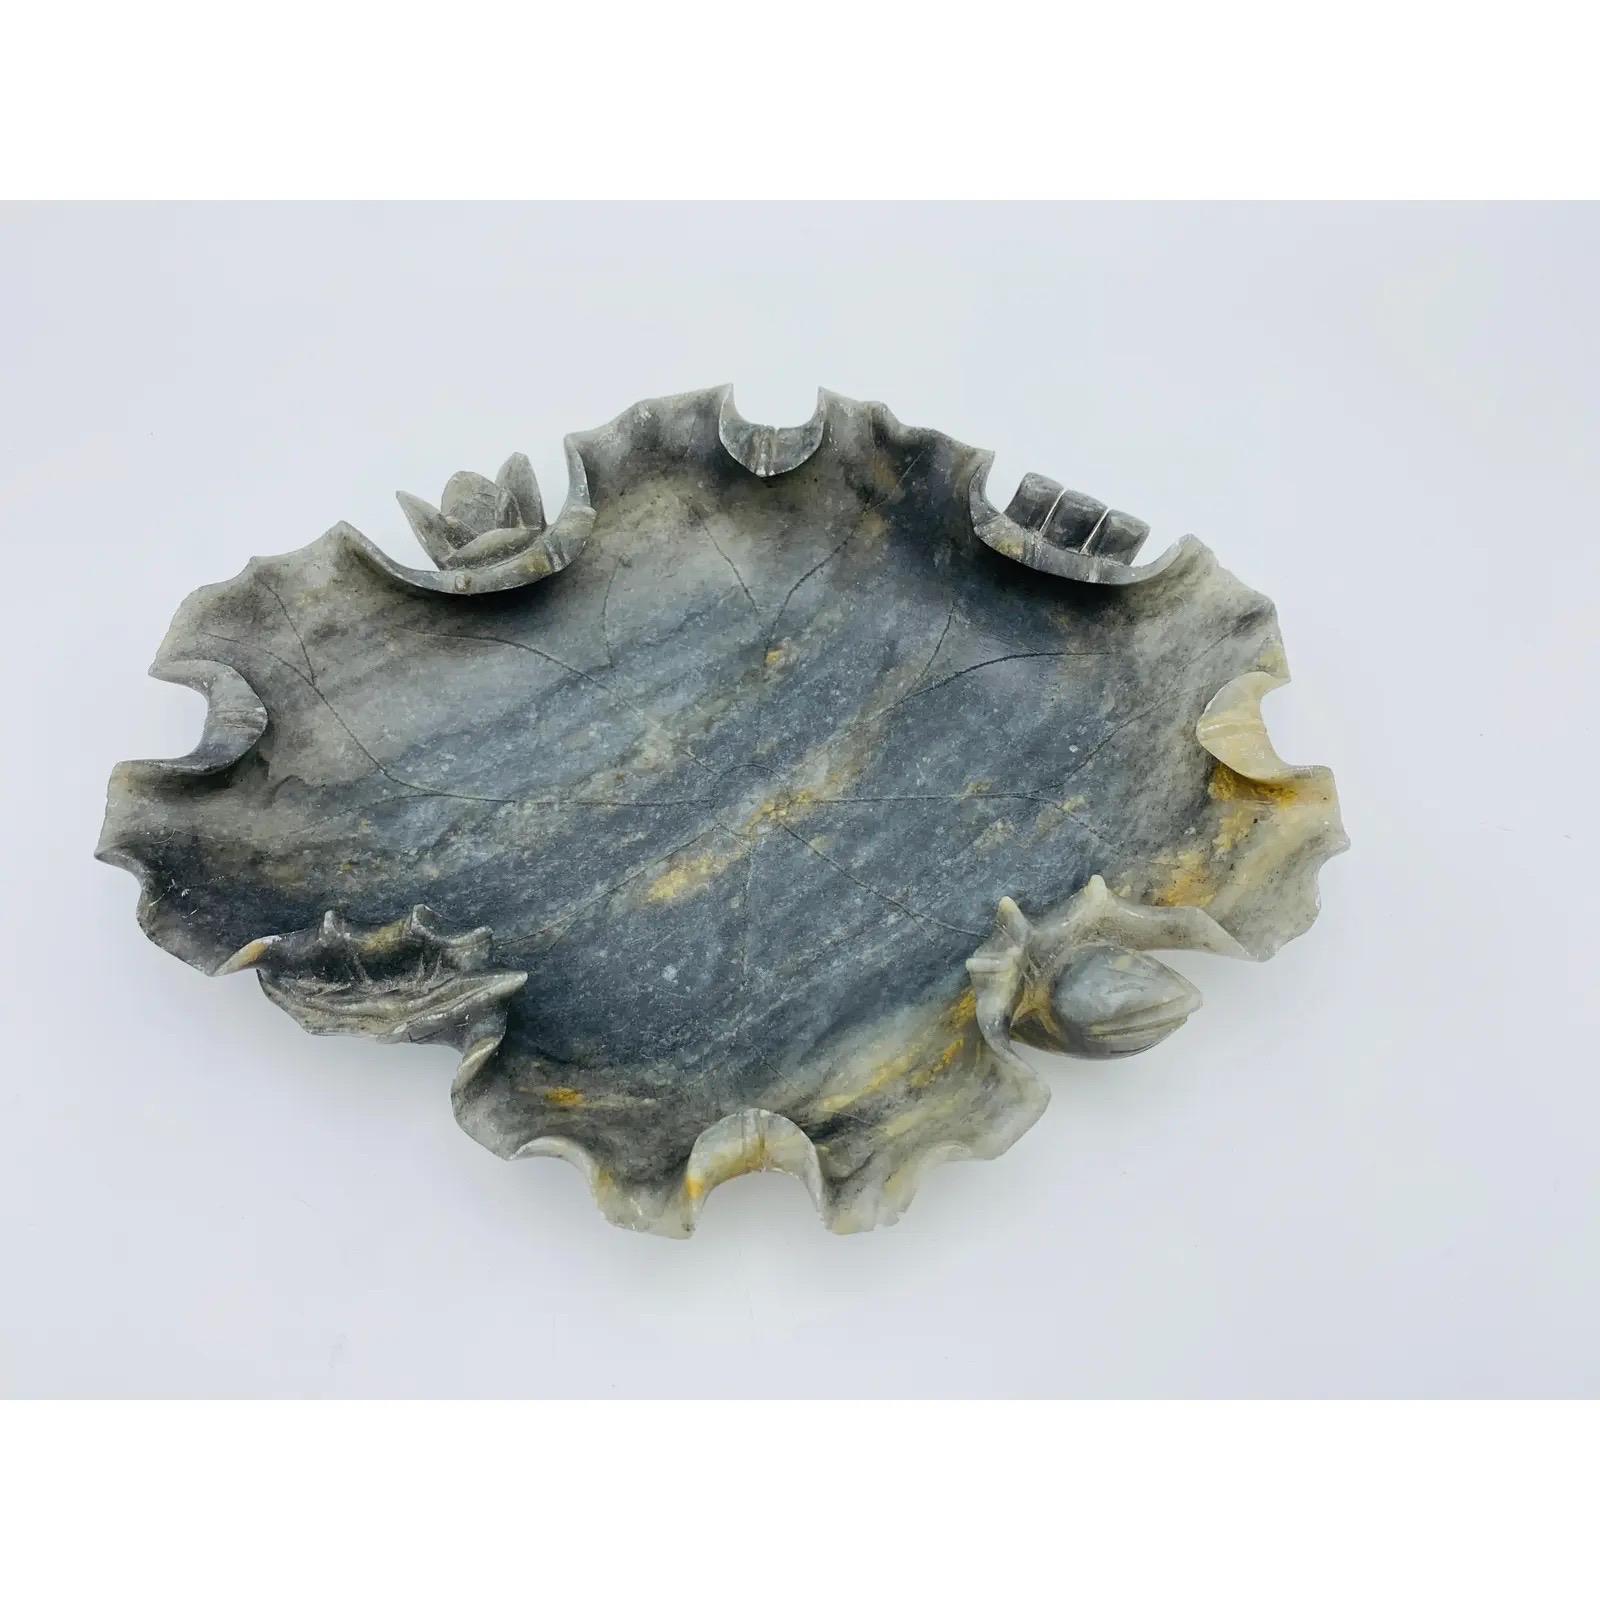 Listed is an absolutely stunning and rare, early 20th century, Italian dark alabaster sculptural lotus leaf dish. This hand carved piece has beautiful, natural veining all-over with heavily detailed edges of the 'leaf'. Incredibly gorgeous in